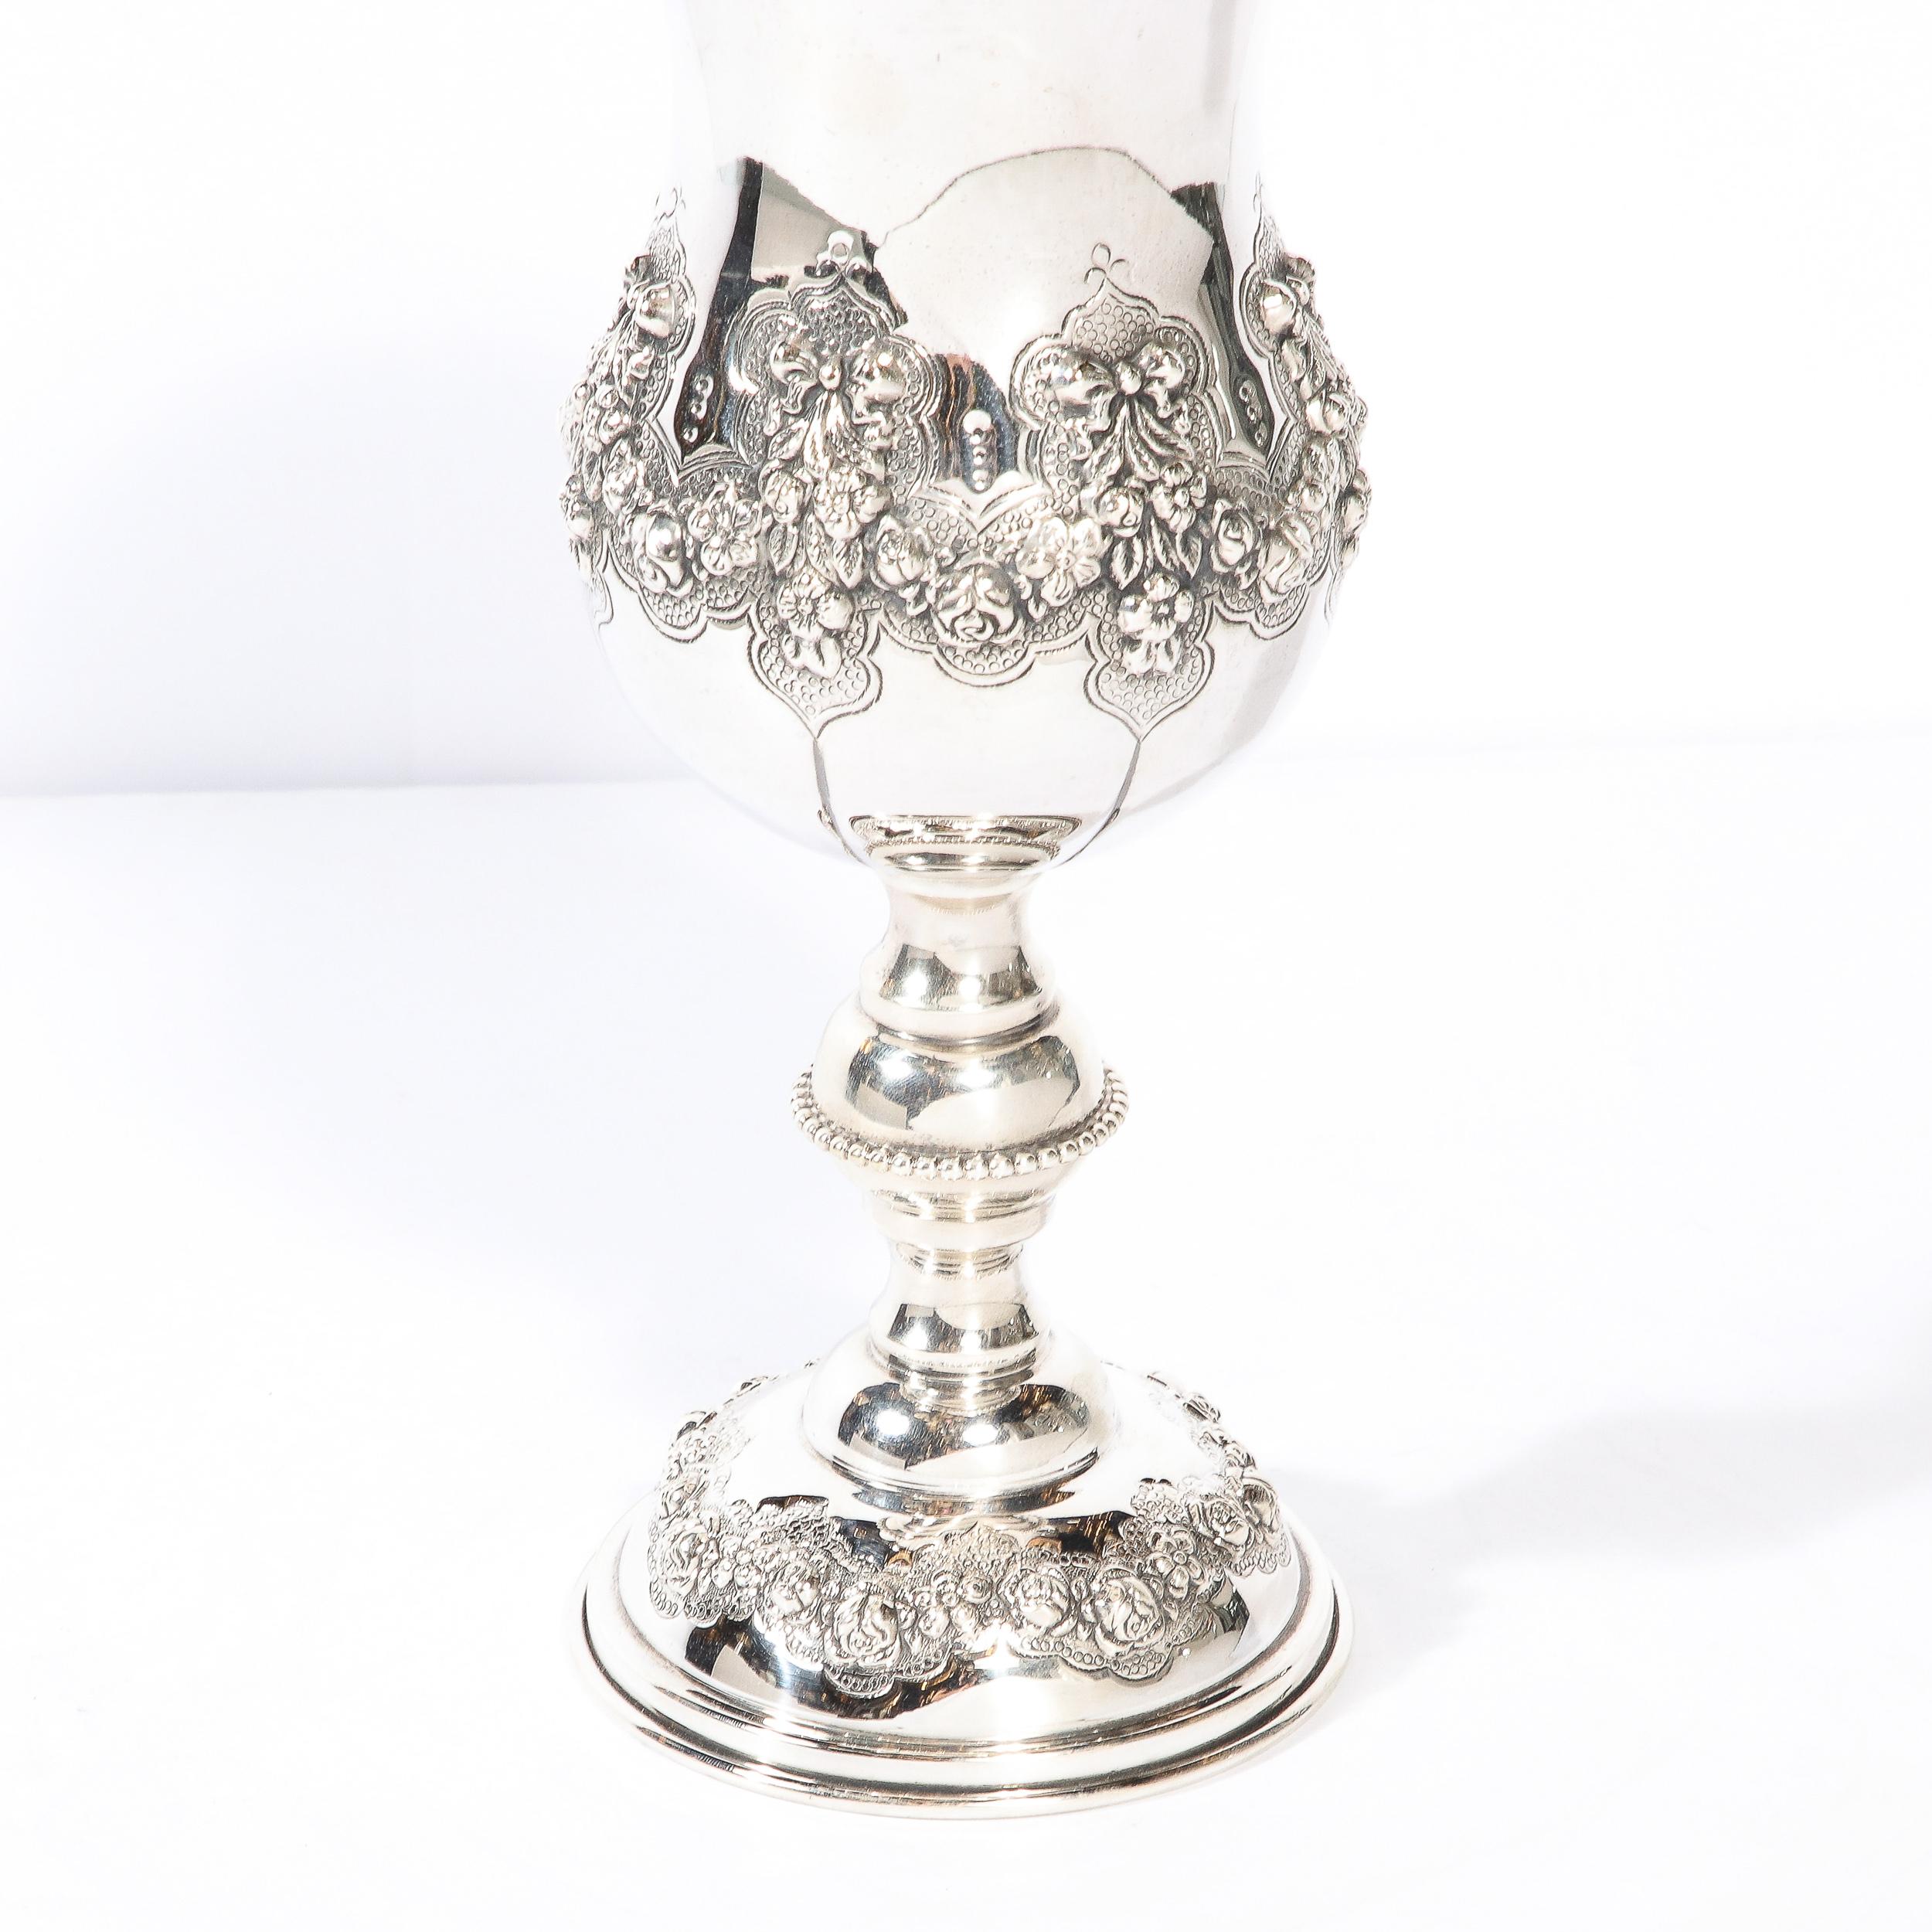 Monumental Sterling  Kiddish Goblet with Repousse Designs  by Hadad Brothers In Excellent Condition For Sale In New York, NY